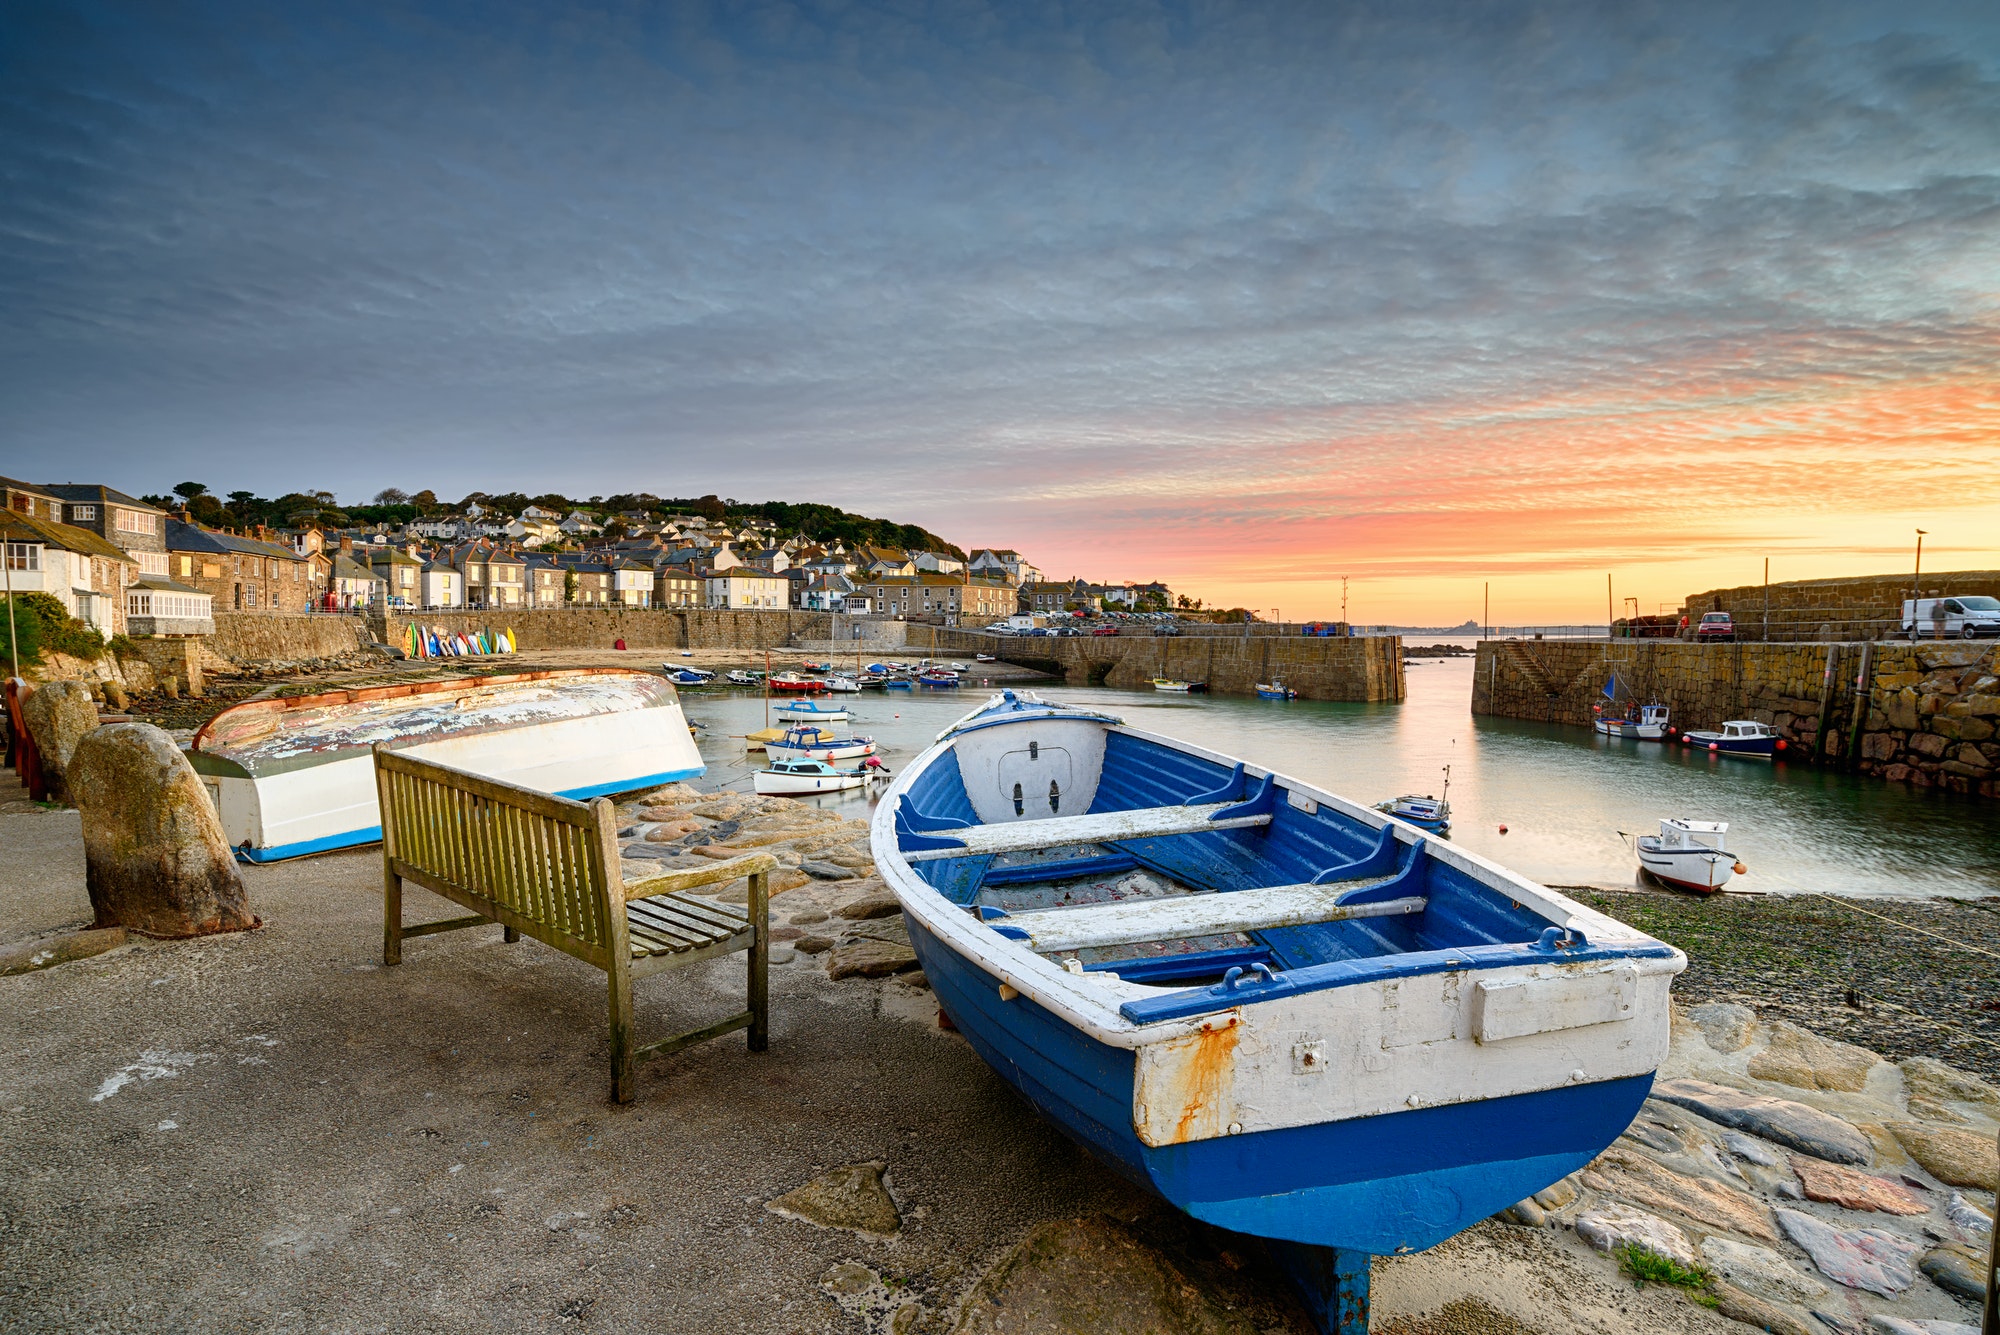 Sunrise at Mousehole harbour with a boat on the harbour wall and pink sky in the background